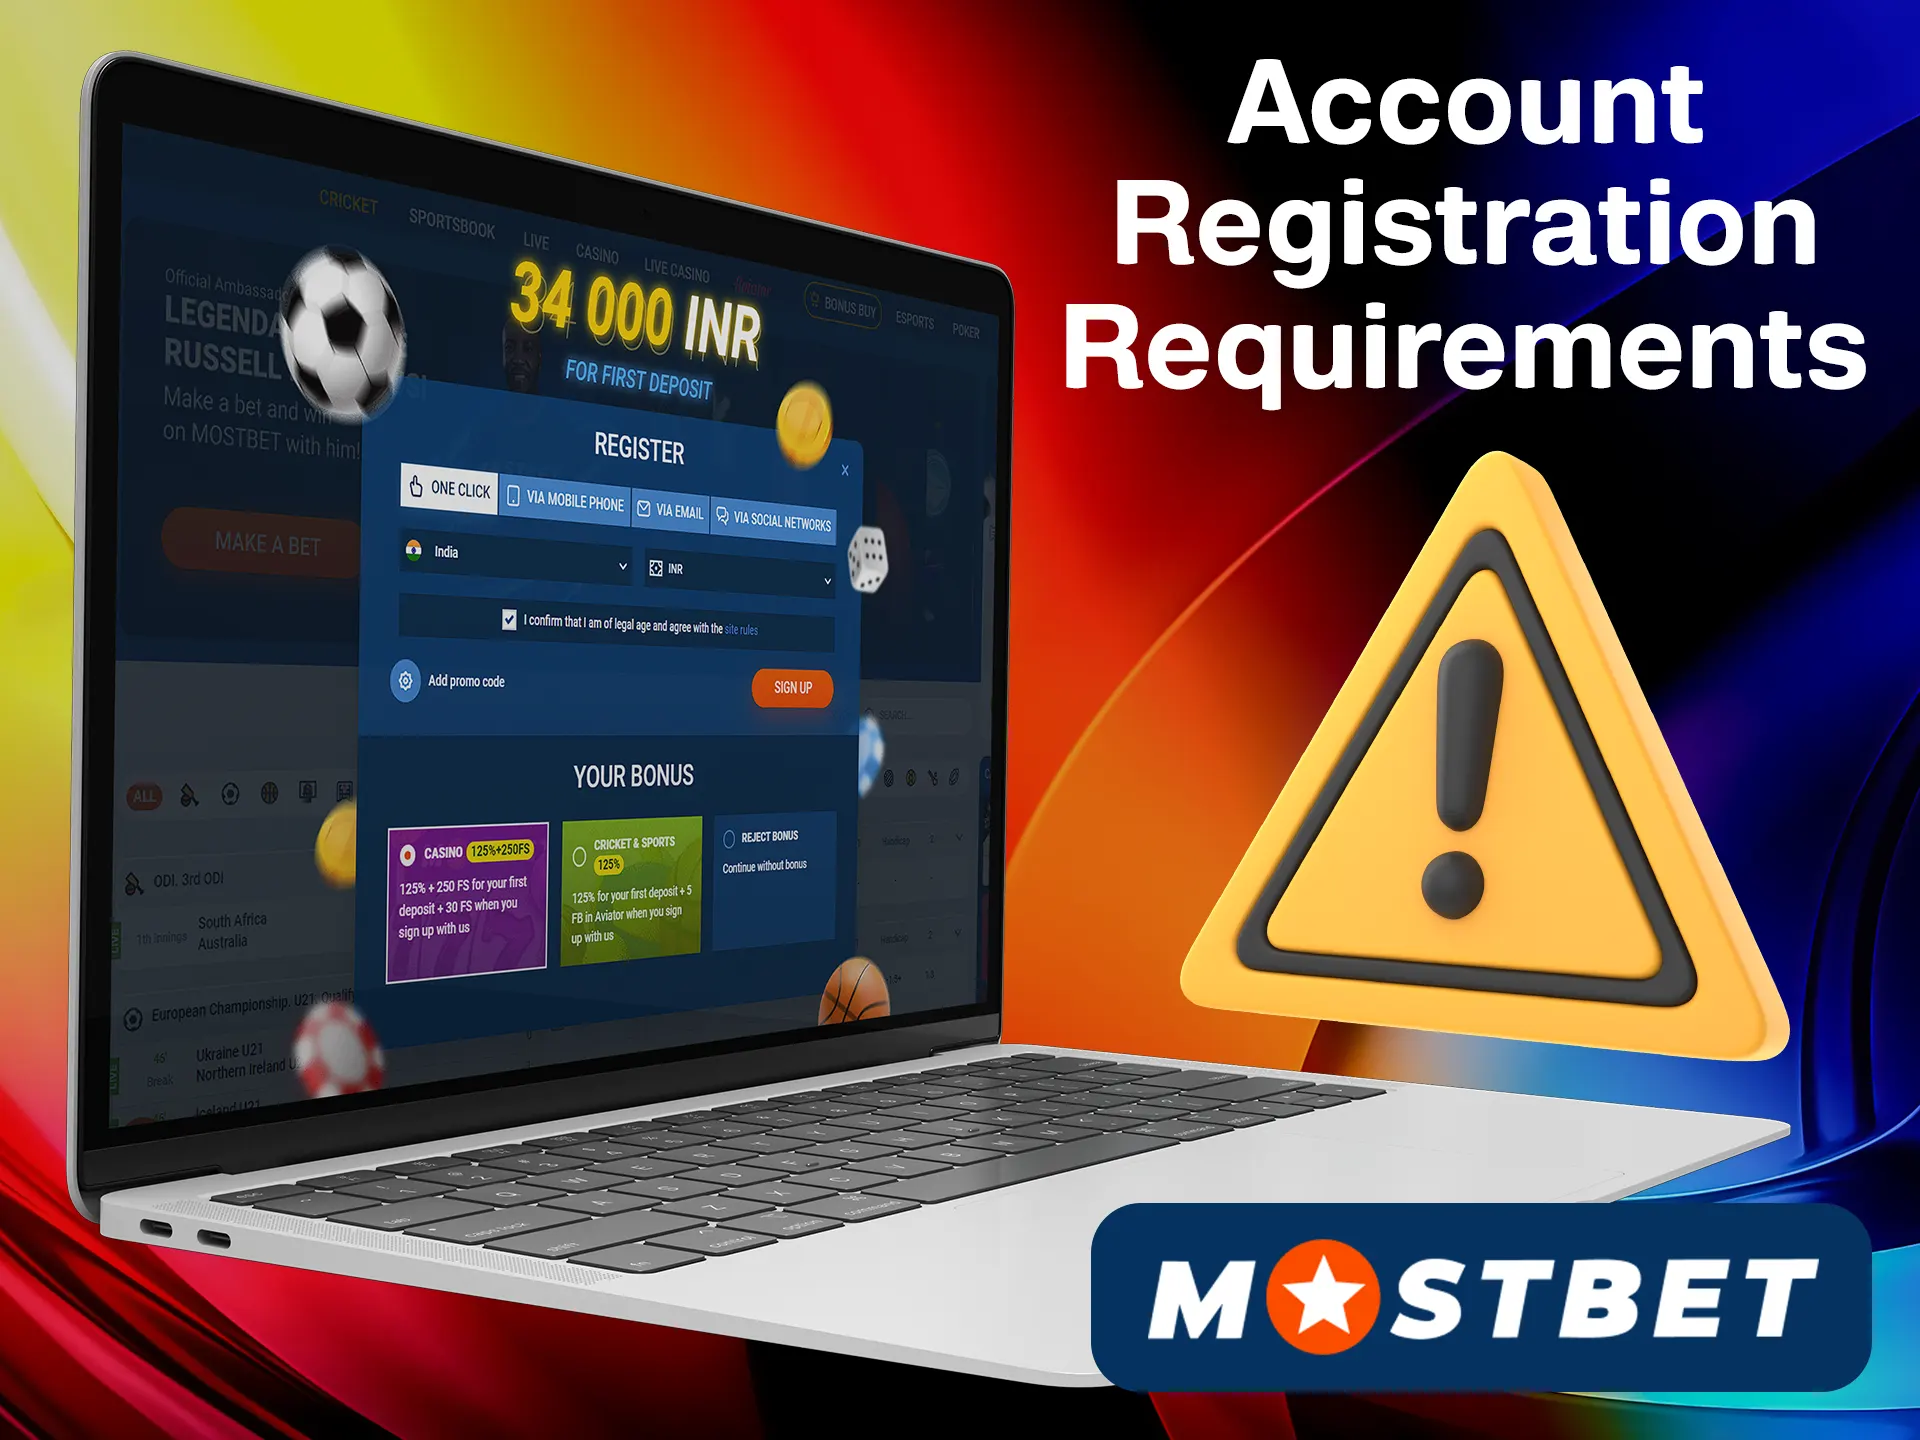 You must follow Mostbet registration rules while making a new account.